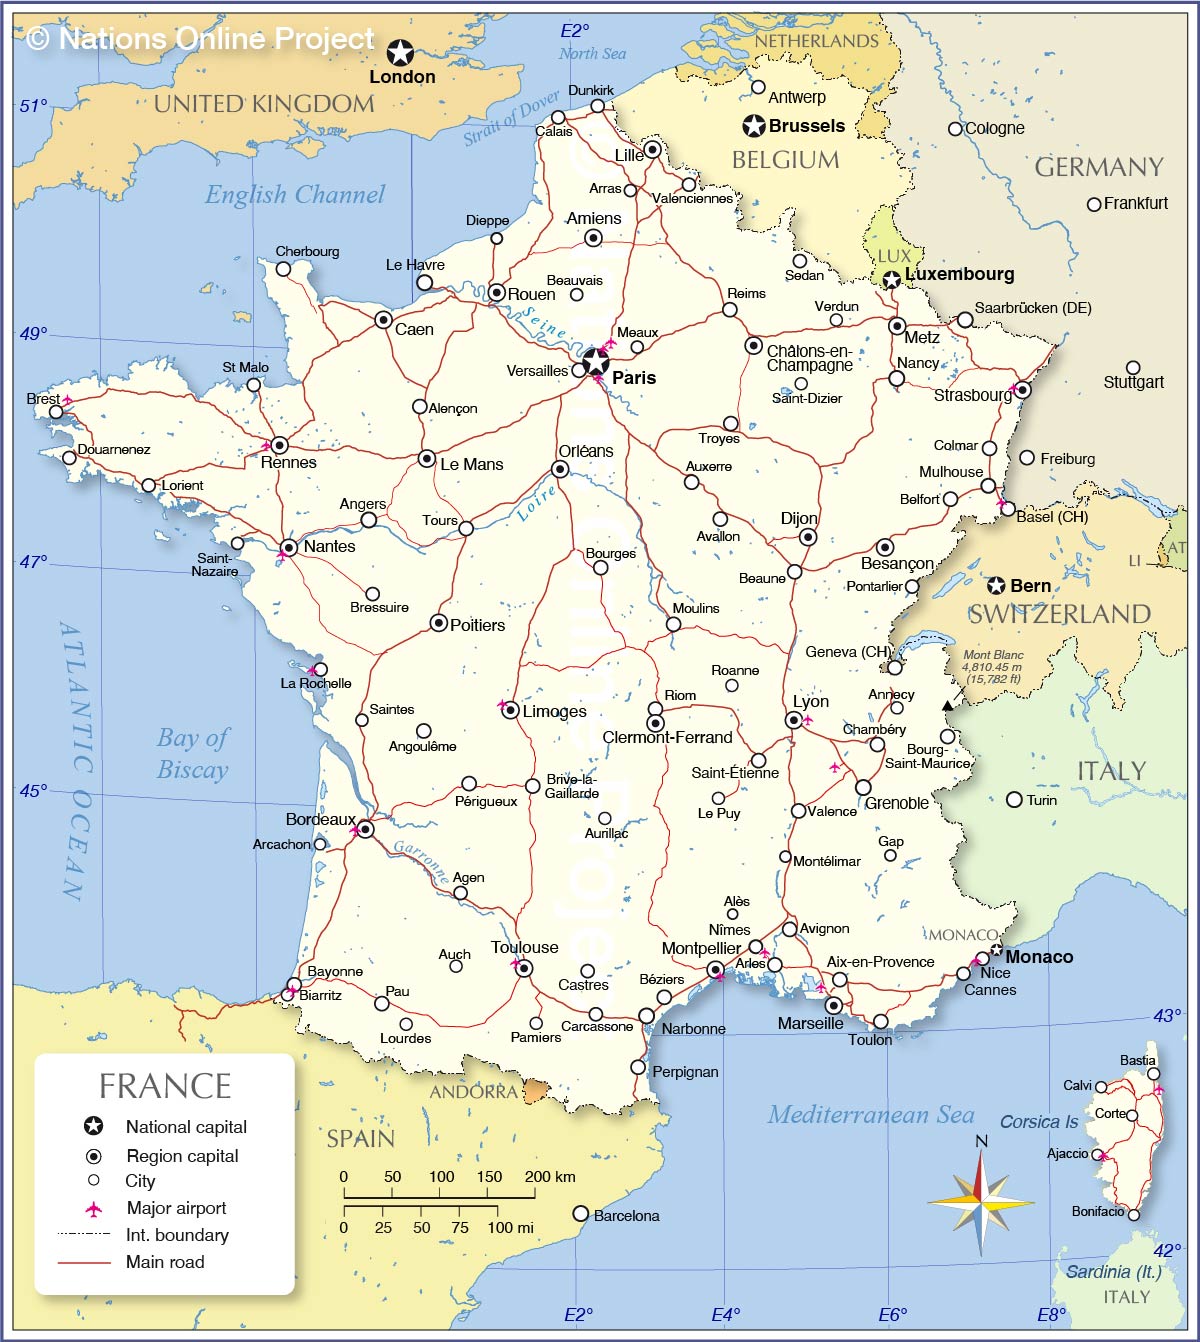 Map of France showing Metropolitan France with surrounding countries, cities, and main roads